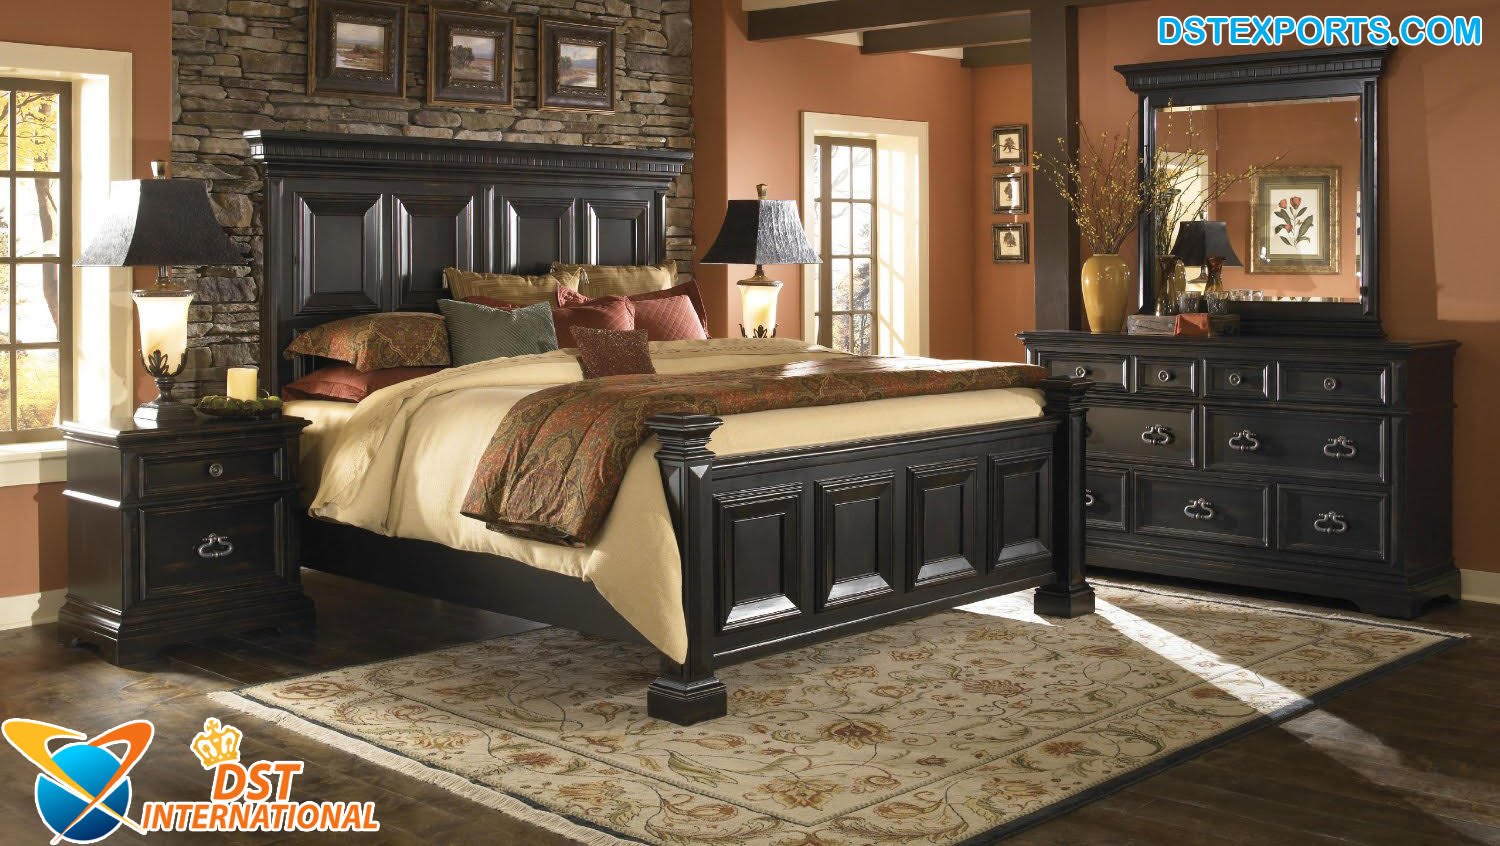 Dark Polished Bedroom Furniture, What Is The Best Quality Bedroom Furniture